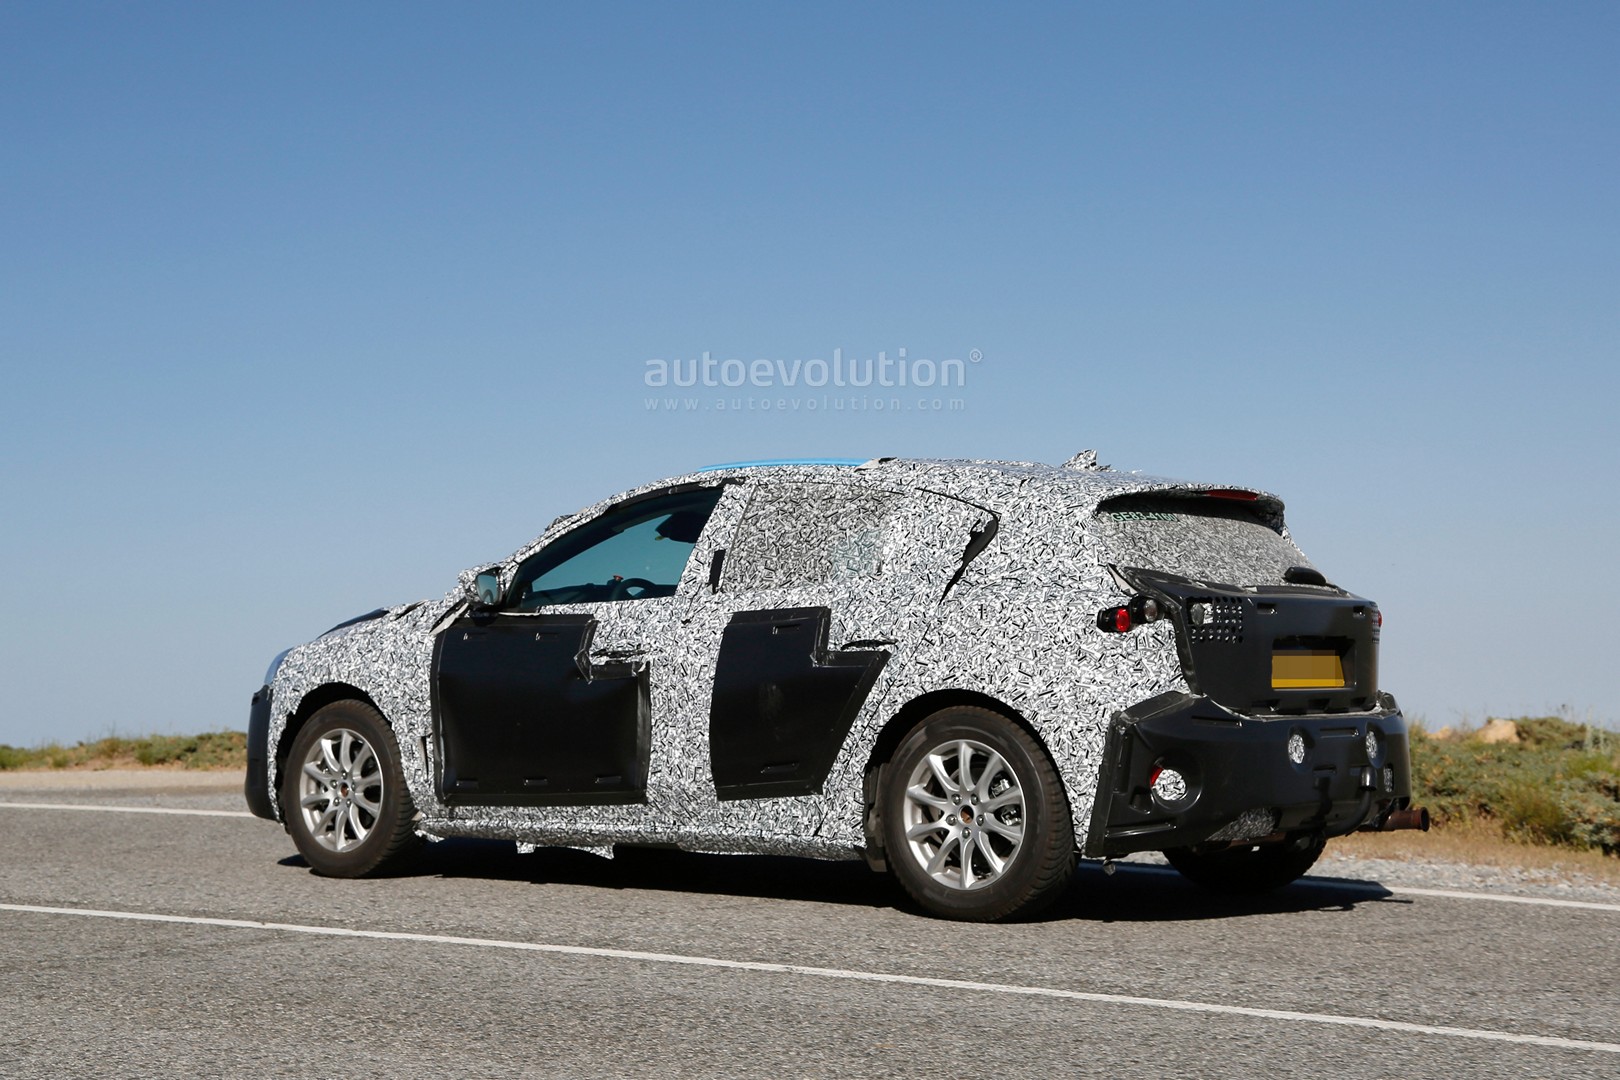 2019 Ford Focus (Mk4) To Debut In First Half Of 2018 - autoevolution